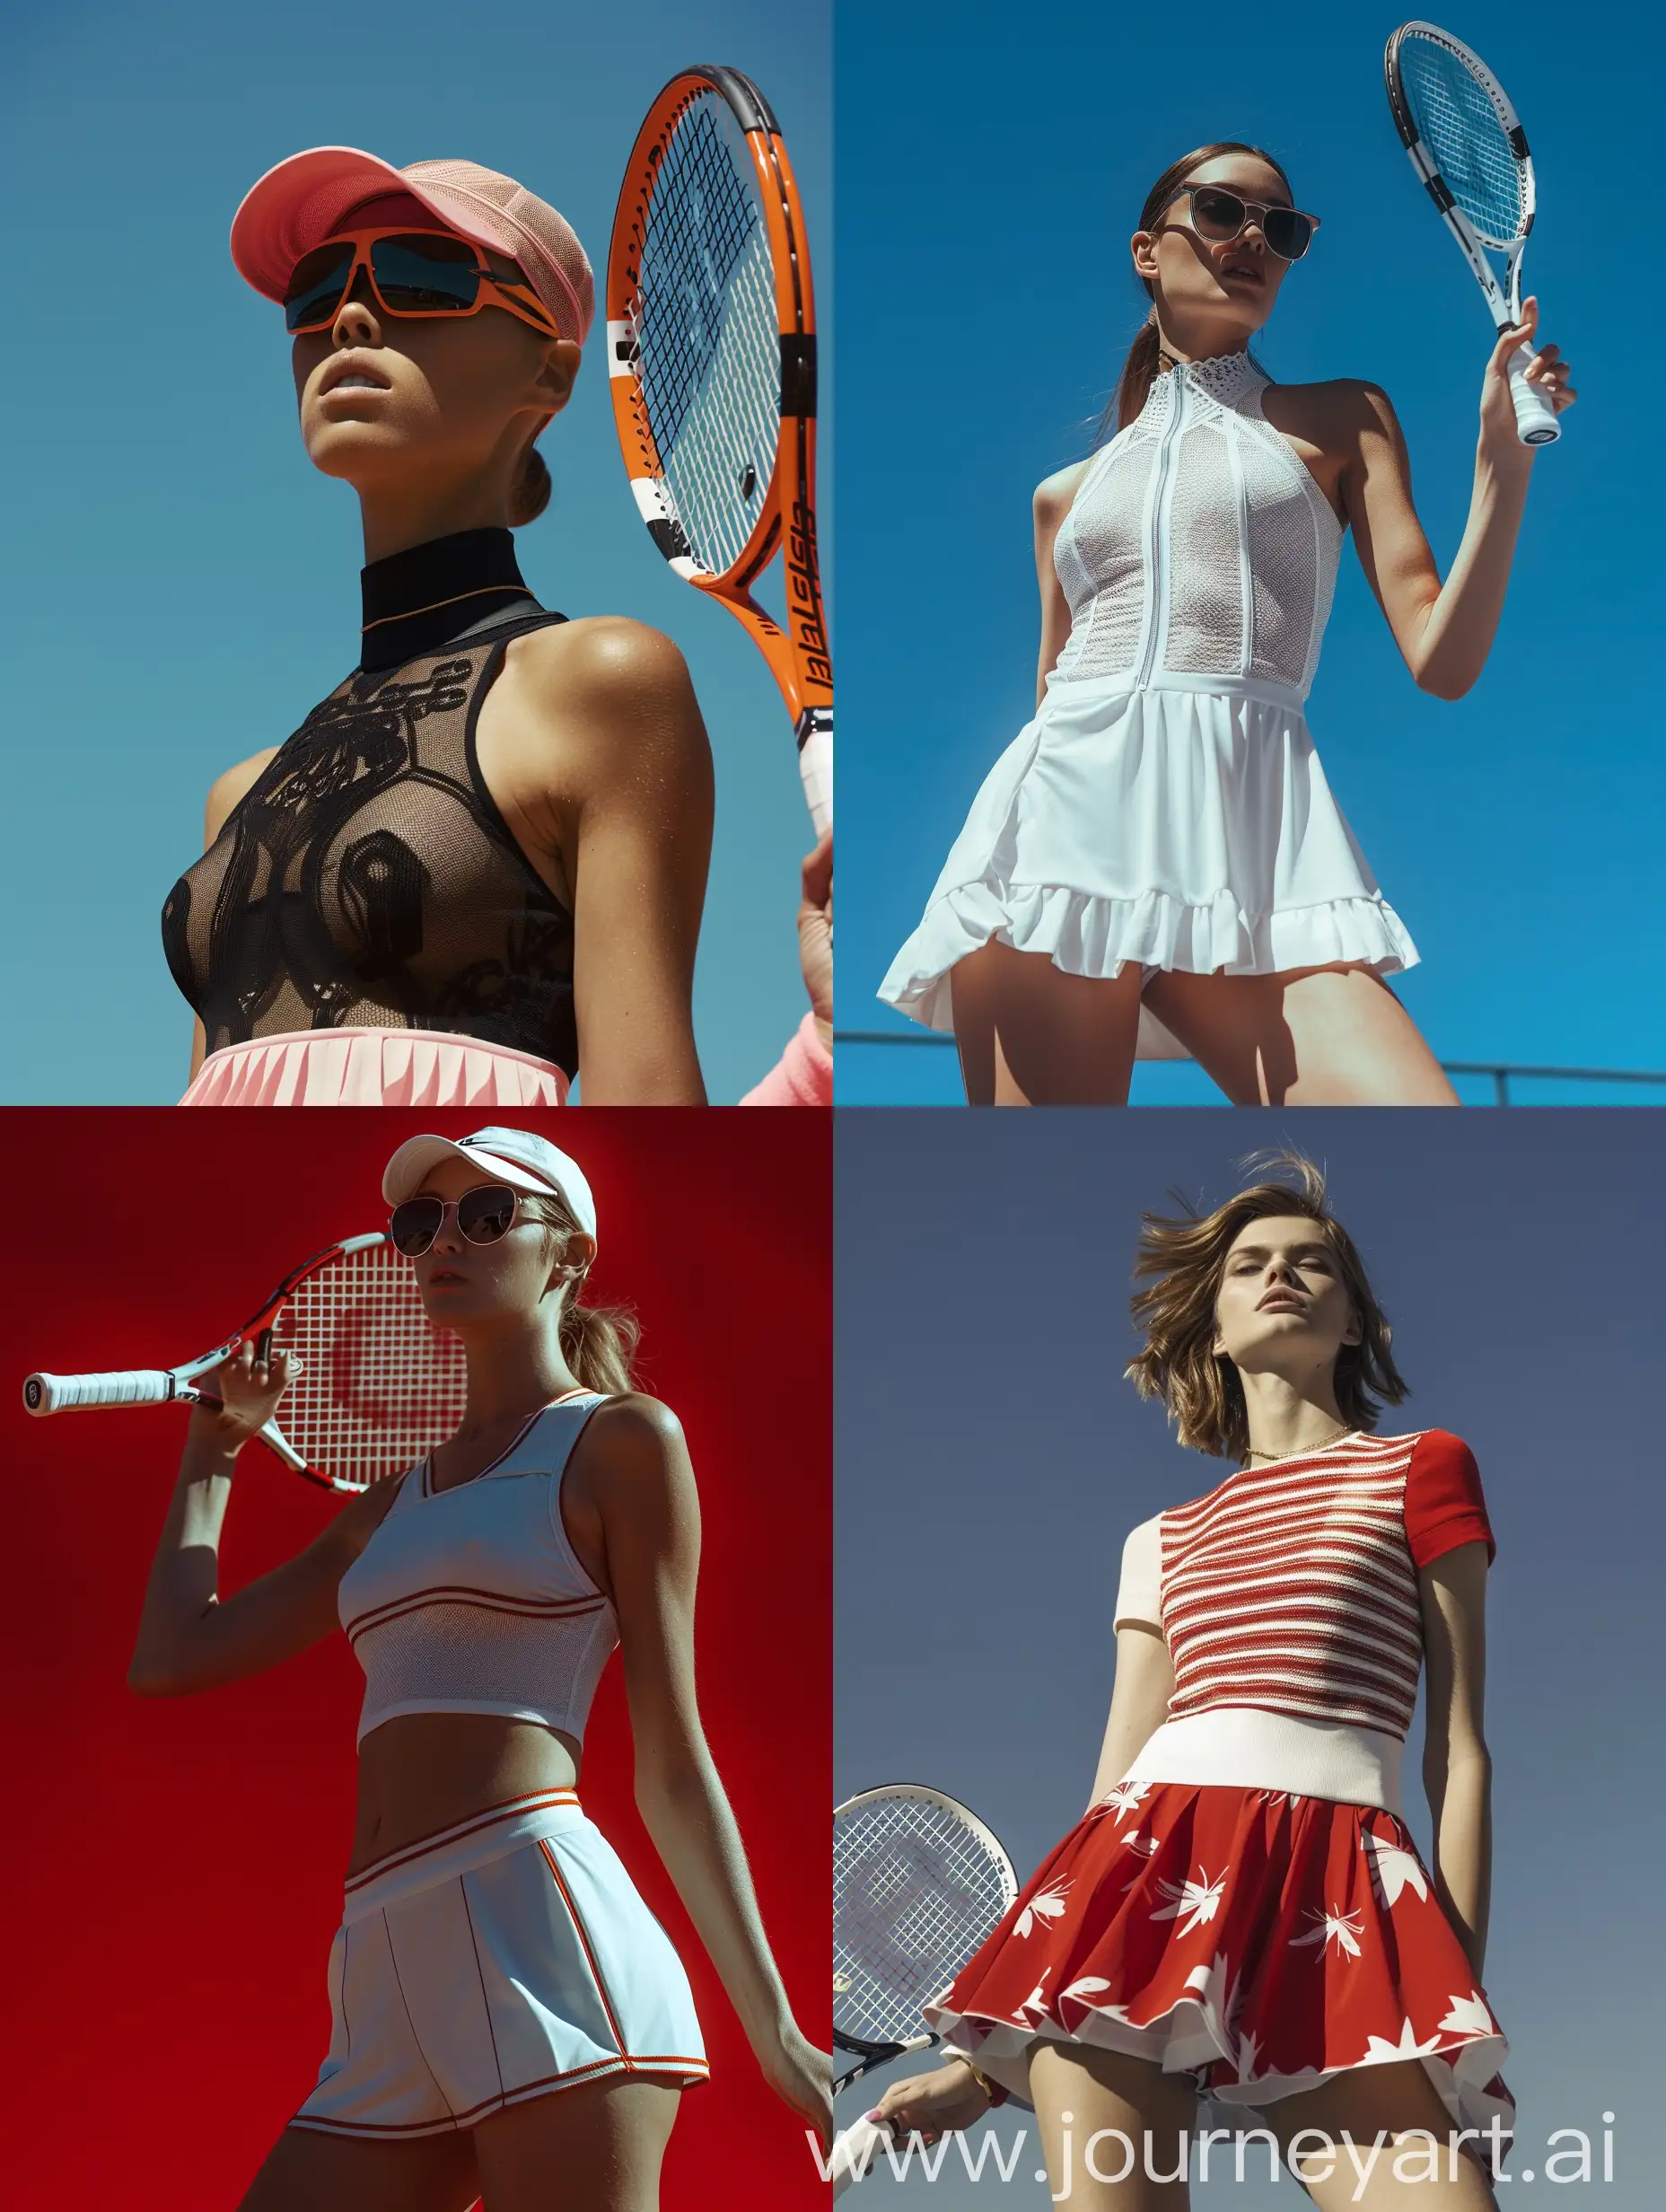 Elegant-Women-in-High-Fashion-Tennis-Outfits-on-a-Sunlit-Court